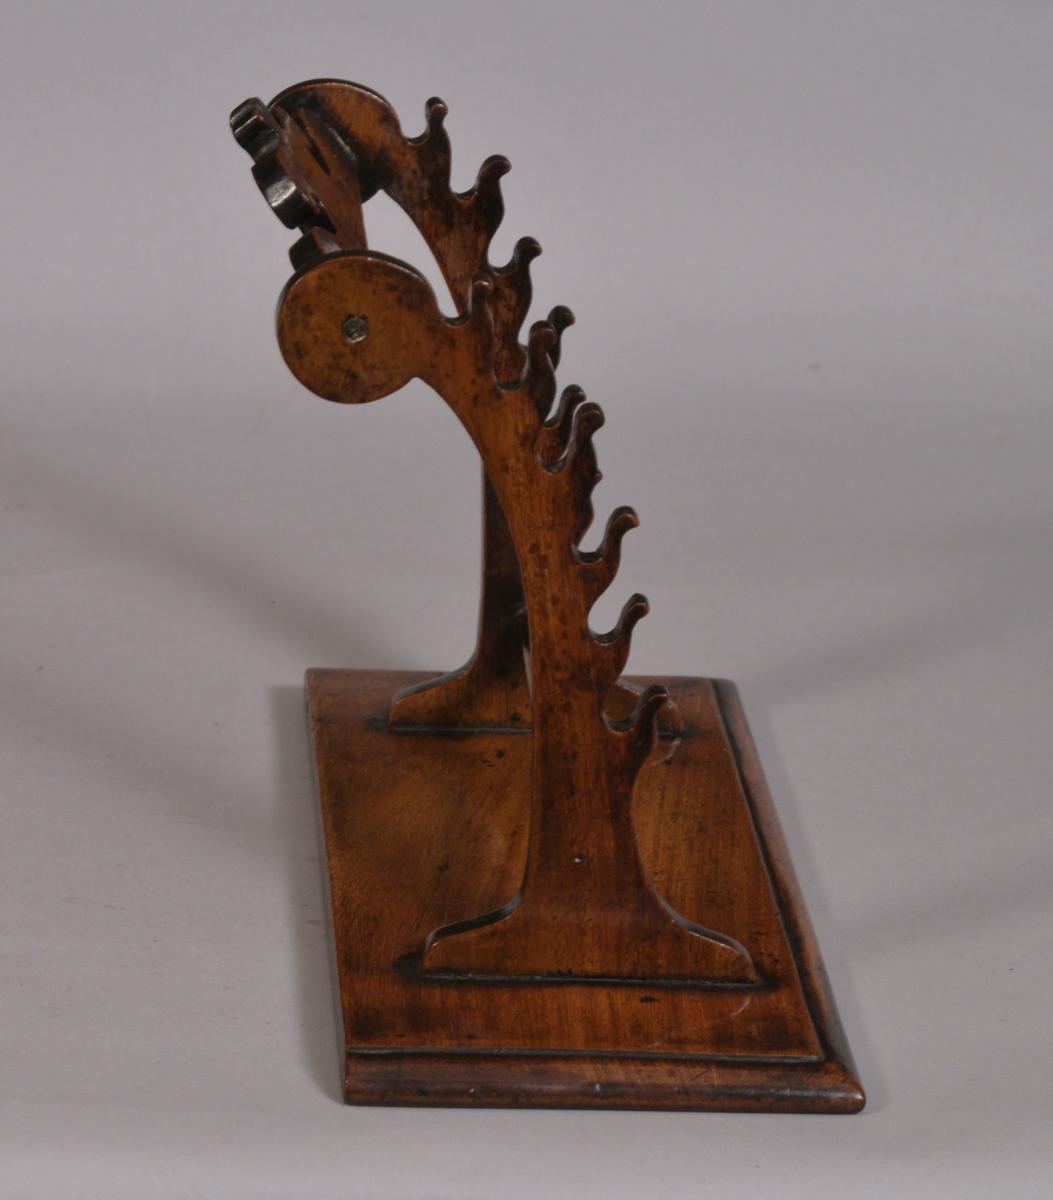 S/3339 Antique Treen 19th Century Walnut Quill Stand